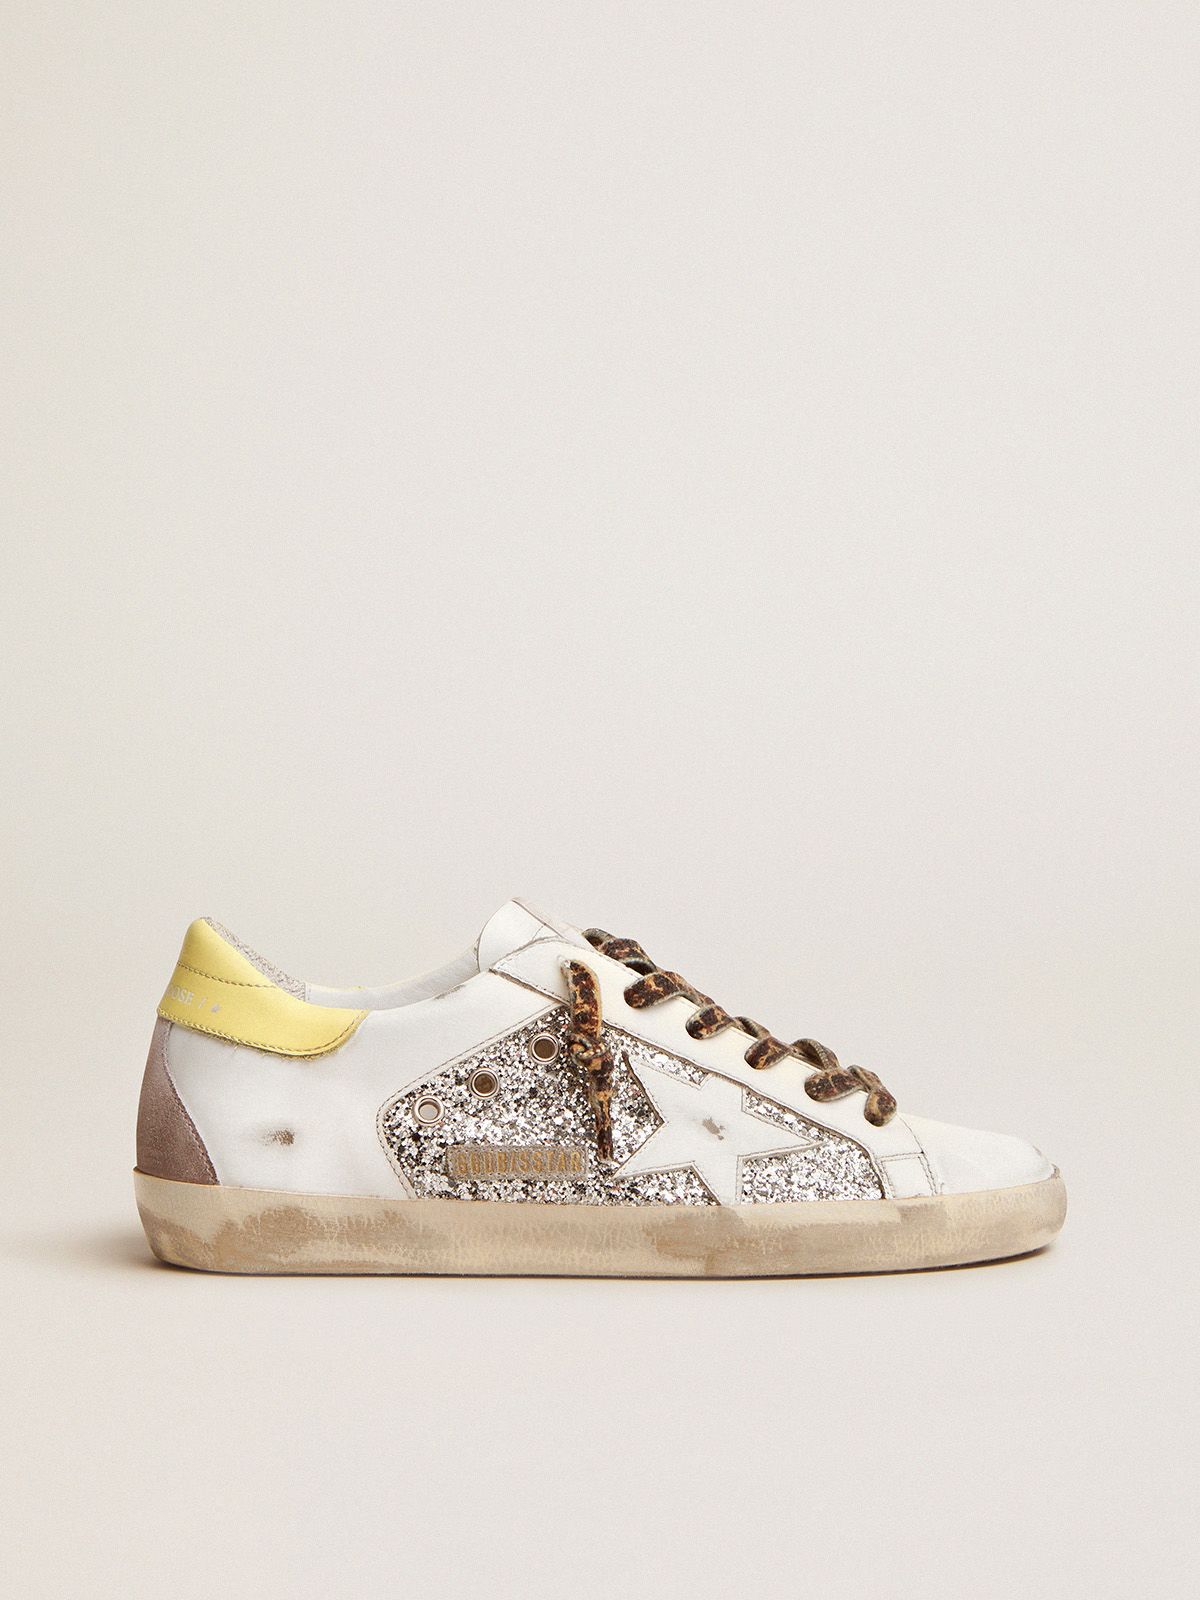 LTD Super-Star Sneakers in leather and glitter with colorful heel tab | 